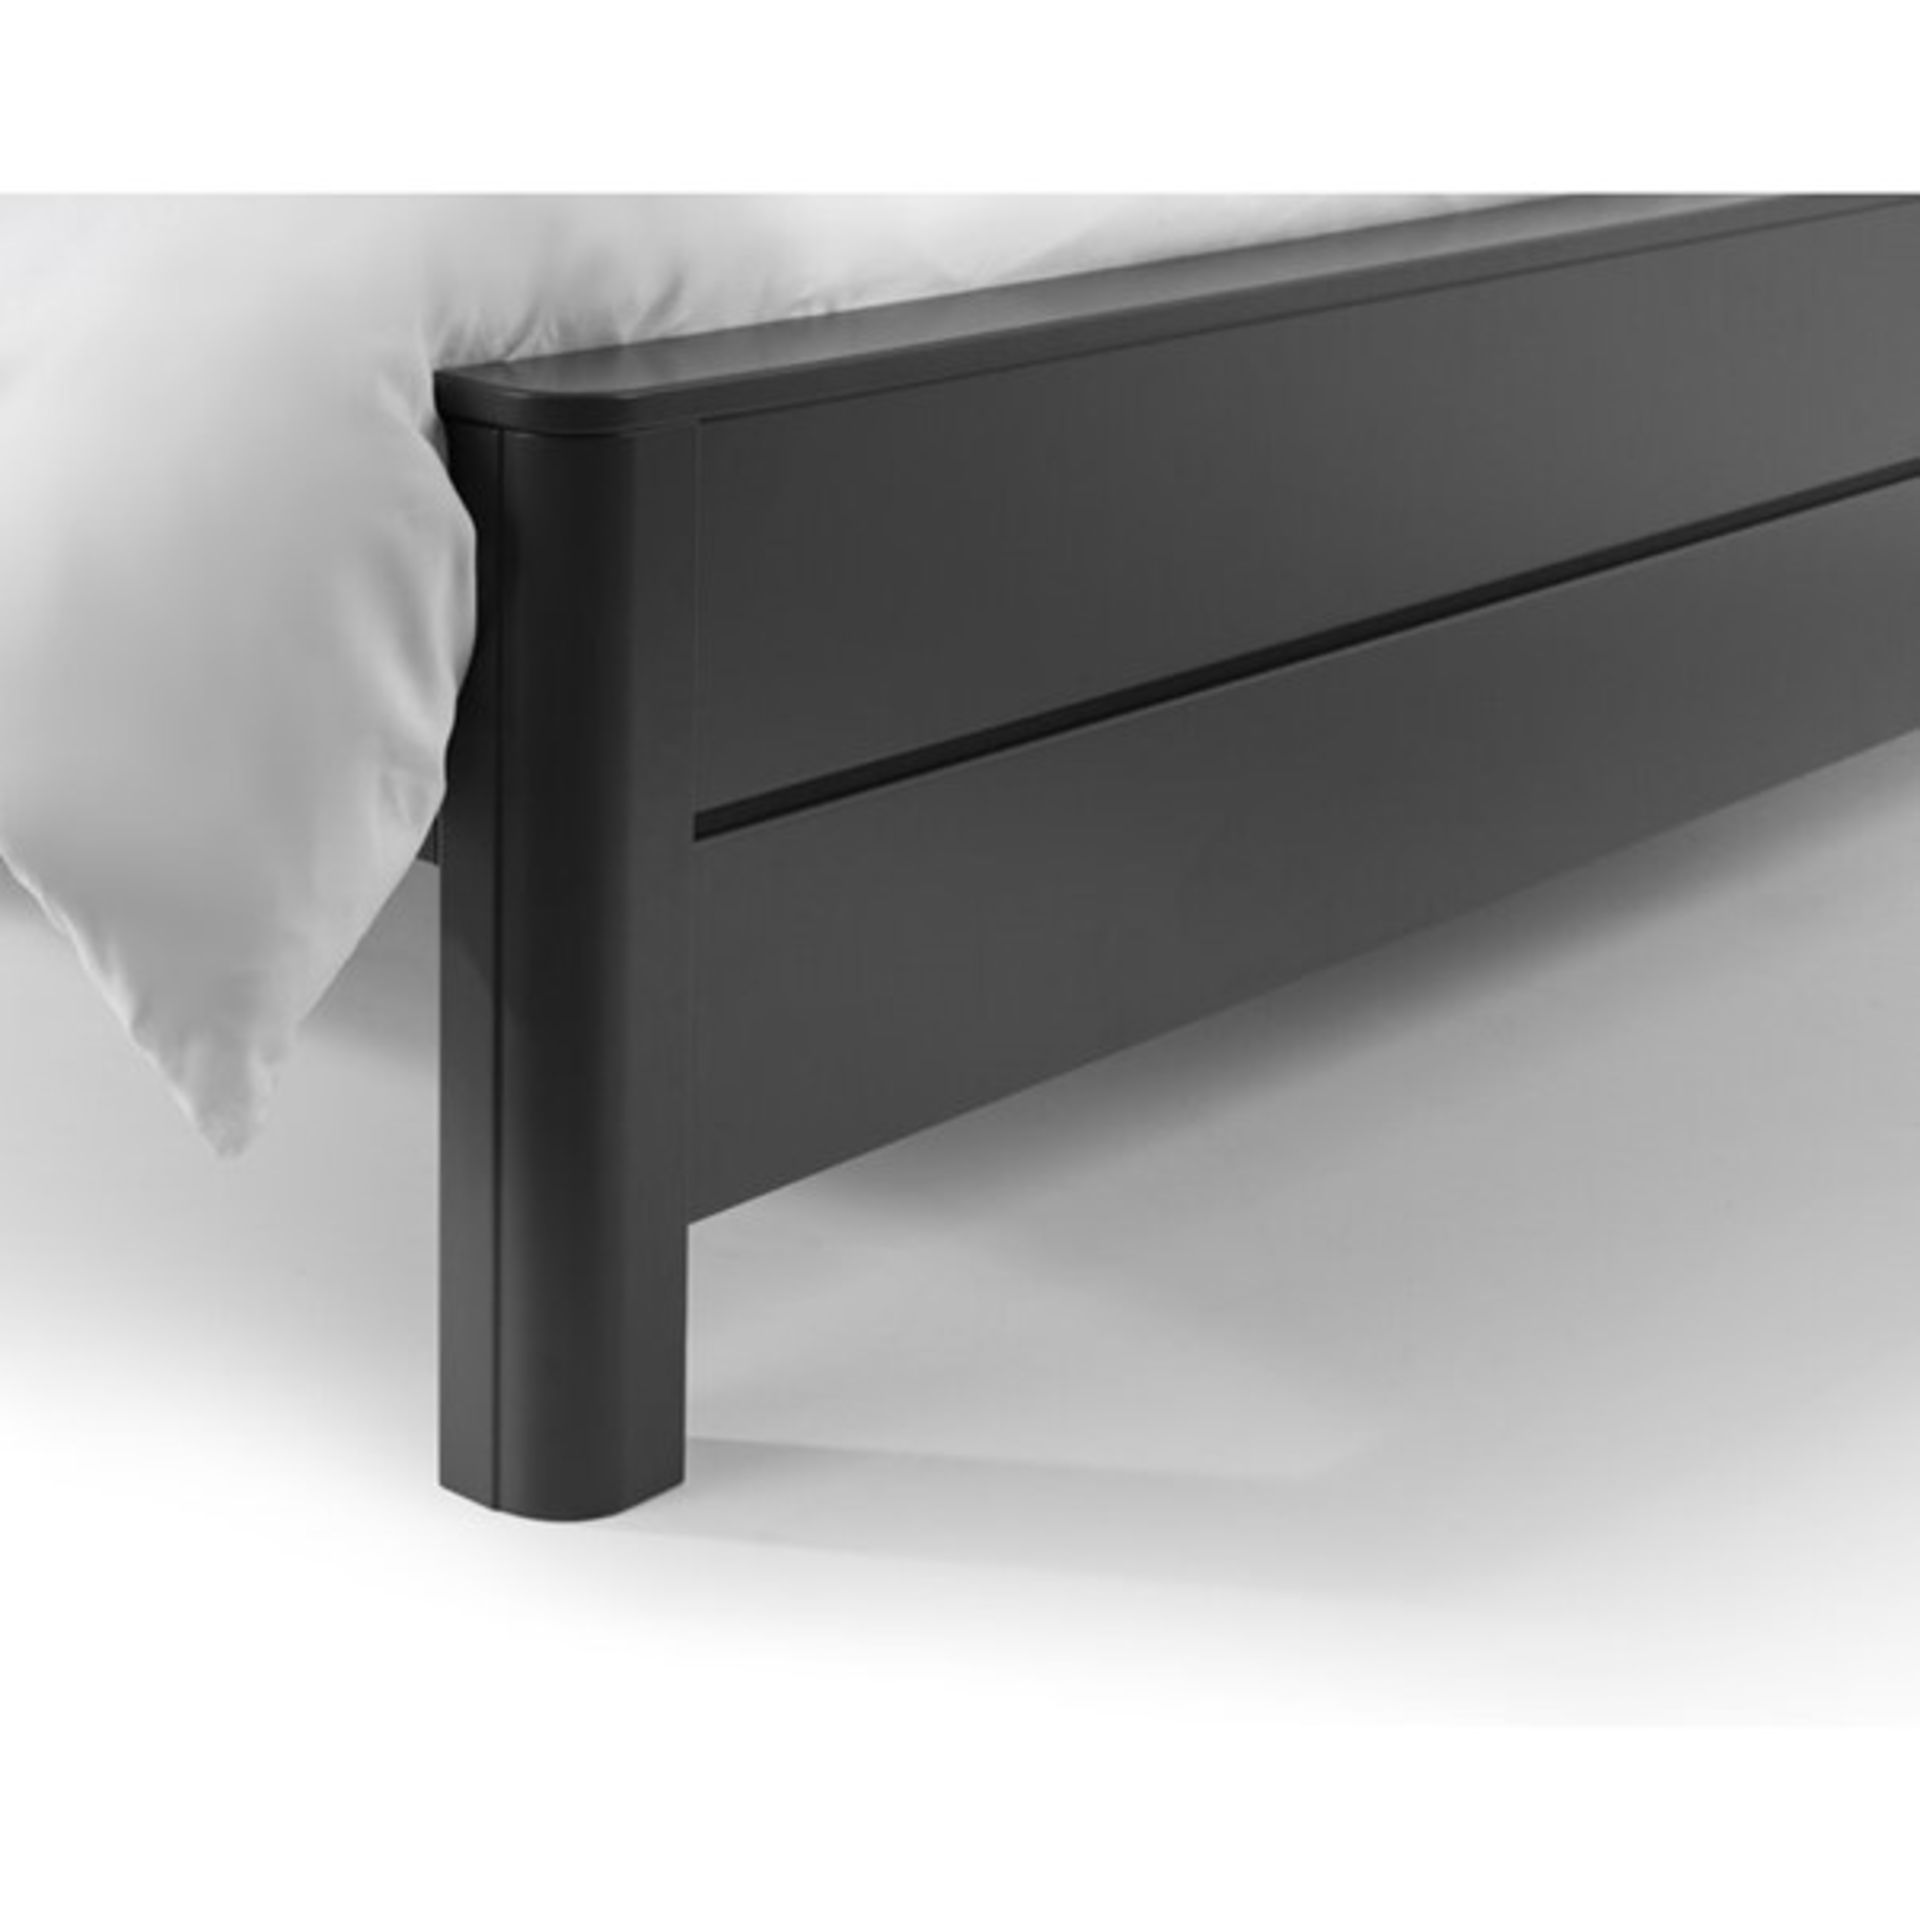 RRP £445.99 - 5FT Kingsize Janine Bed Frame - 165cm W x 214cm L - The bedroom collection has a - Image 3 of 3